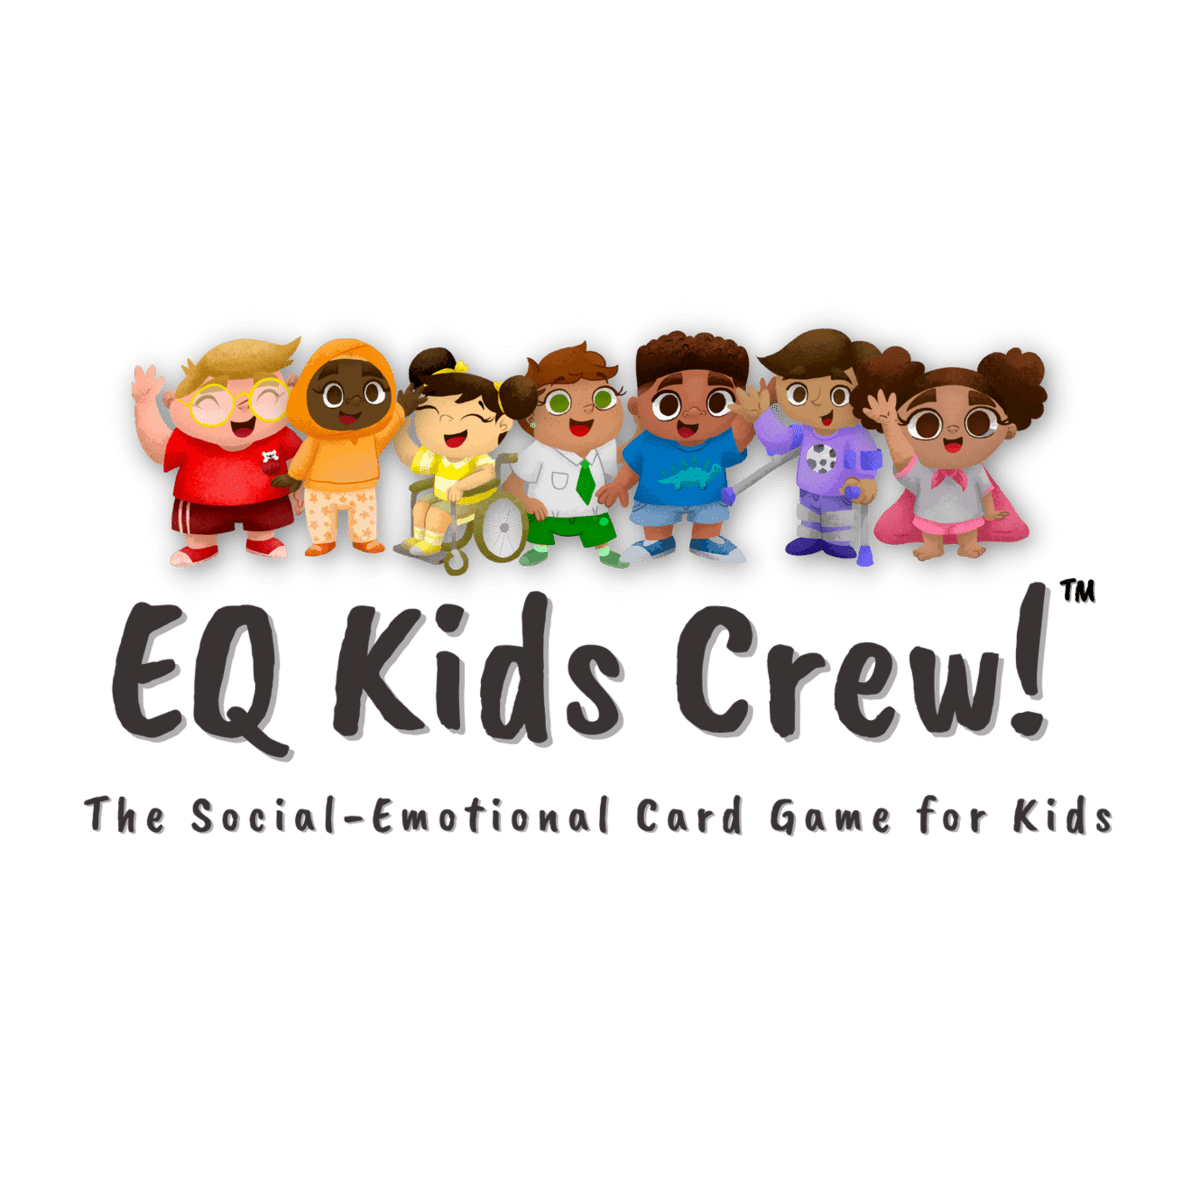 Cartoon drawing of several kids with text: \"EQ Kids Crew! The Social-Emotional Card Game for Kids\"